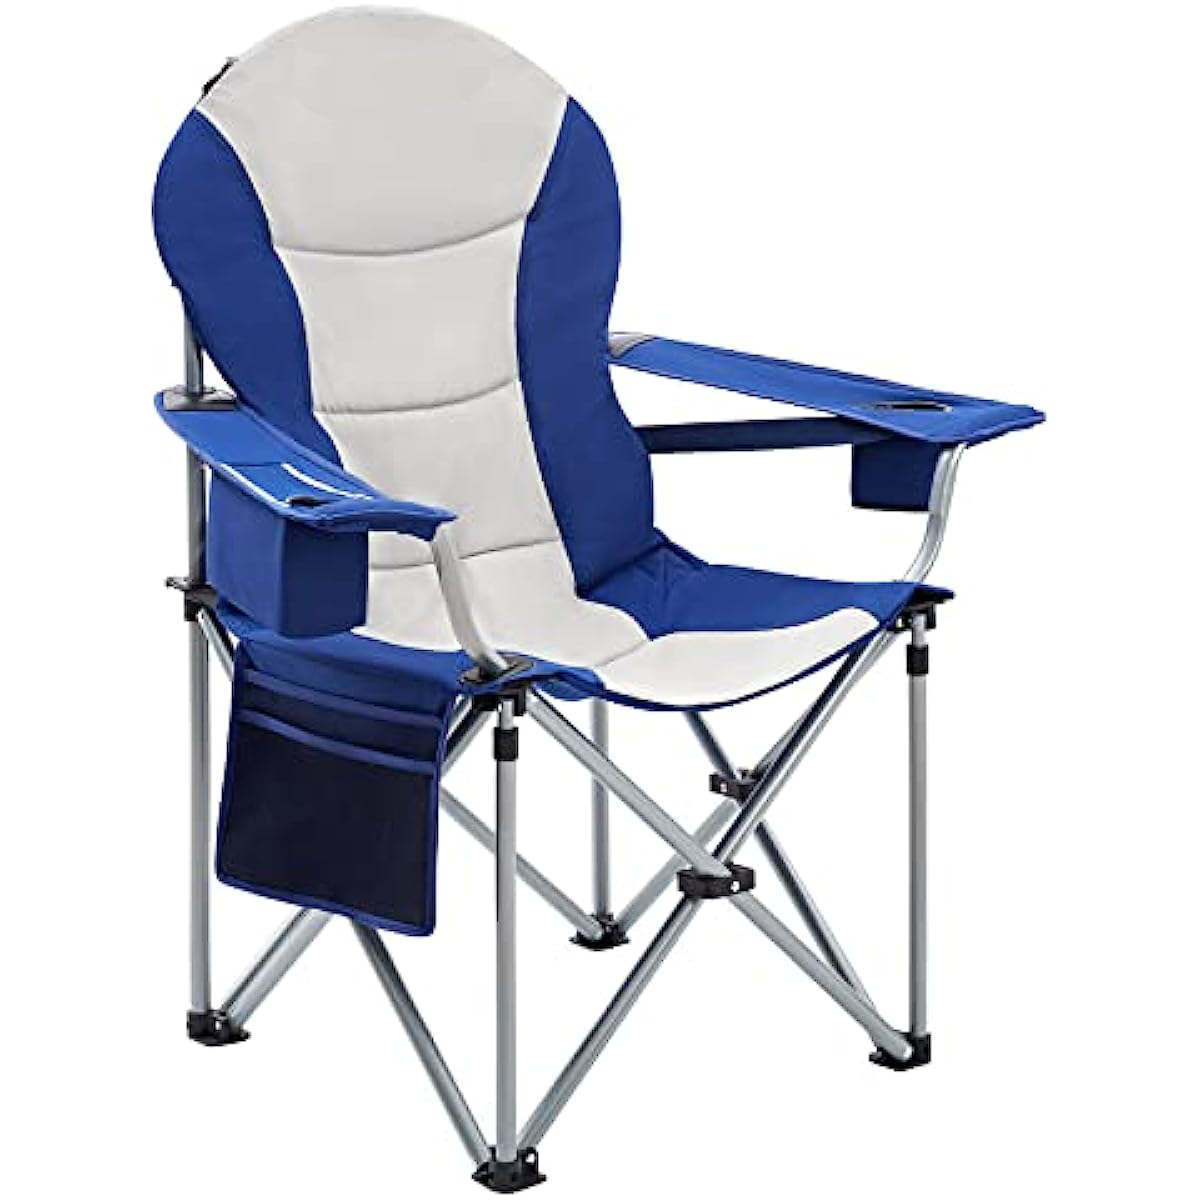 Lumbar Back Padded Camp Chair Heavy Duty Oversized Folding Camping Chair Portable Lawn Chairs with Cooler Bag Armrest and Carry Bag for Outdoor Fishing Yard Sports